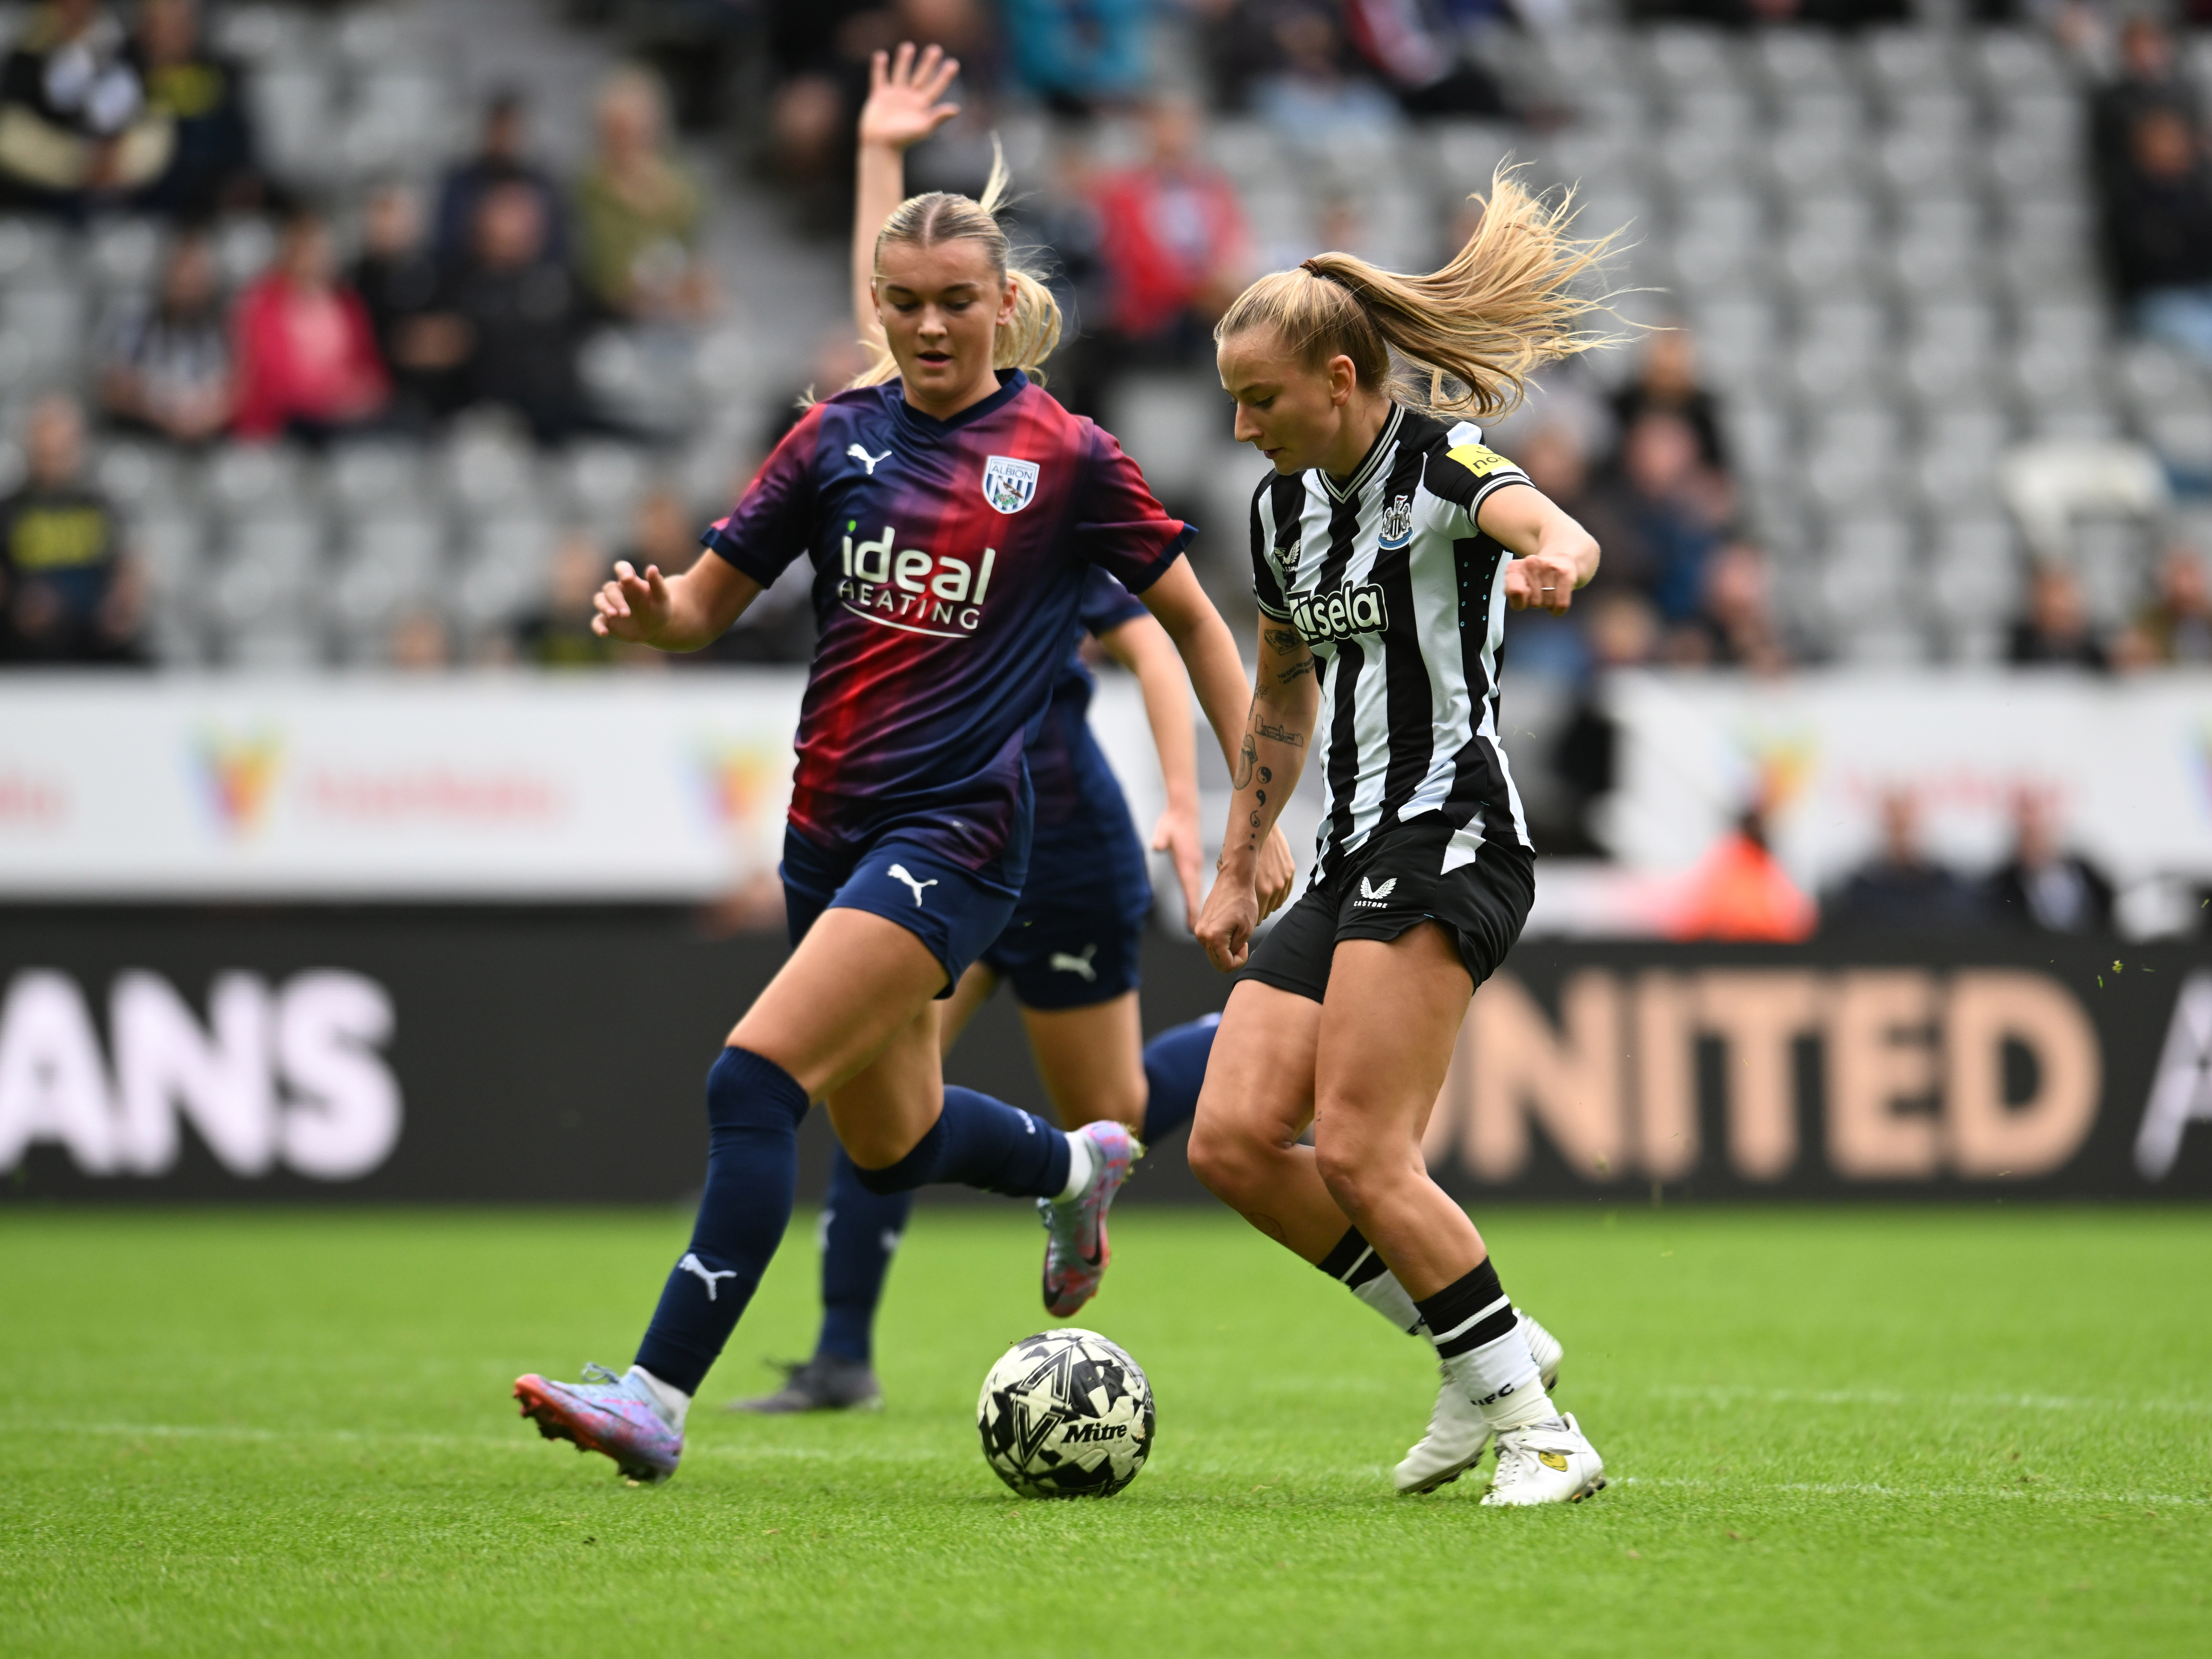 An image of Taylor Reynolds in action for Albion Women against Newcastle